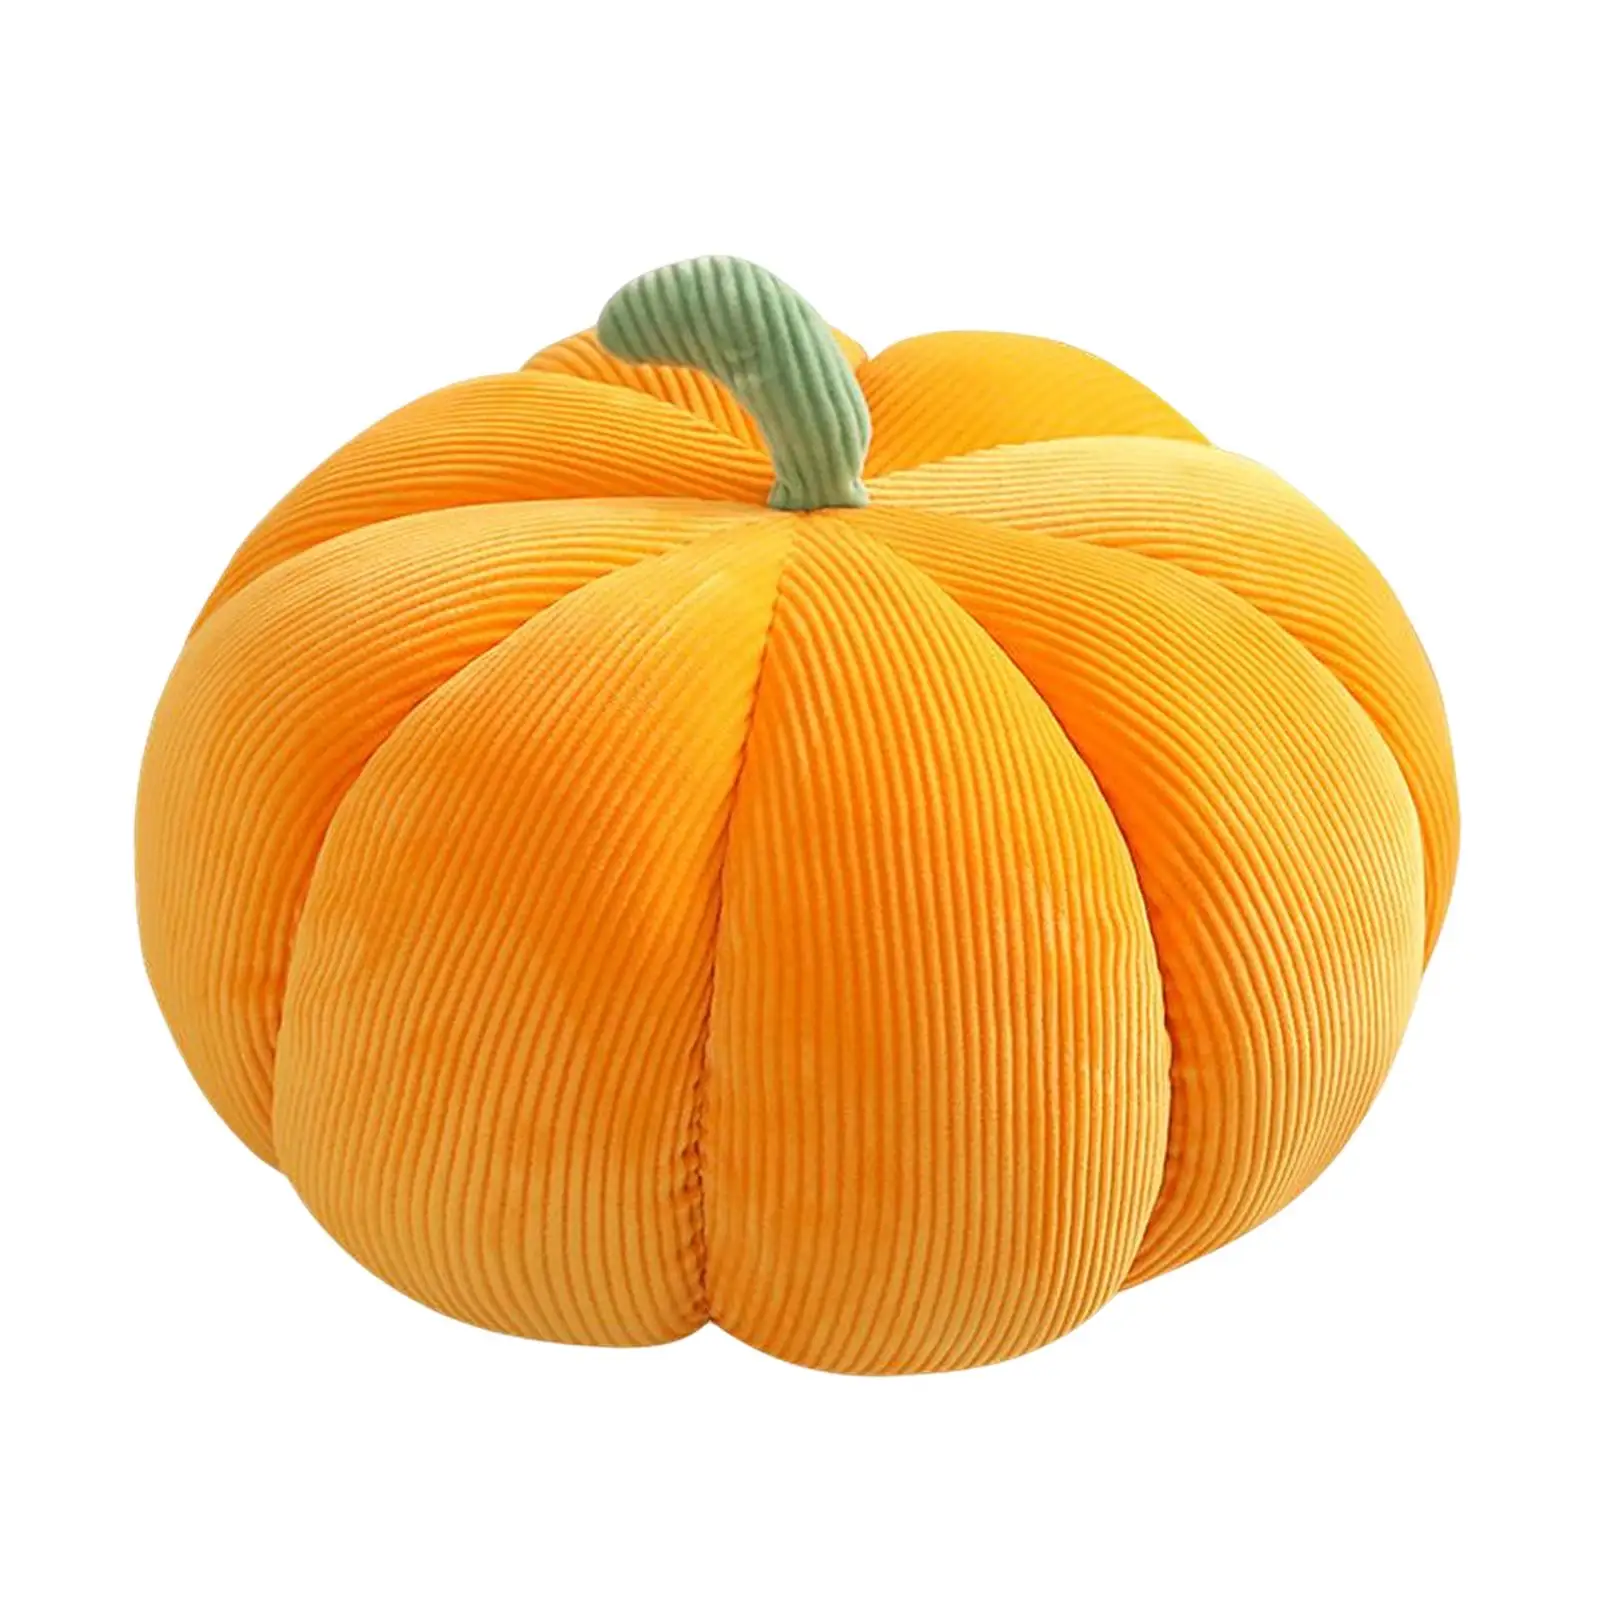 Stuffed Pumpkin Throw Pillow/ Decorative Autumn Decoration Soft Couch Throw Pillow Toy/ for Photography Props Bedroom/